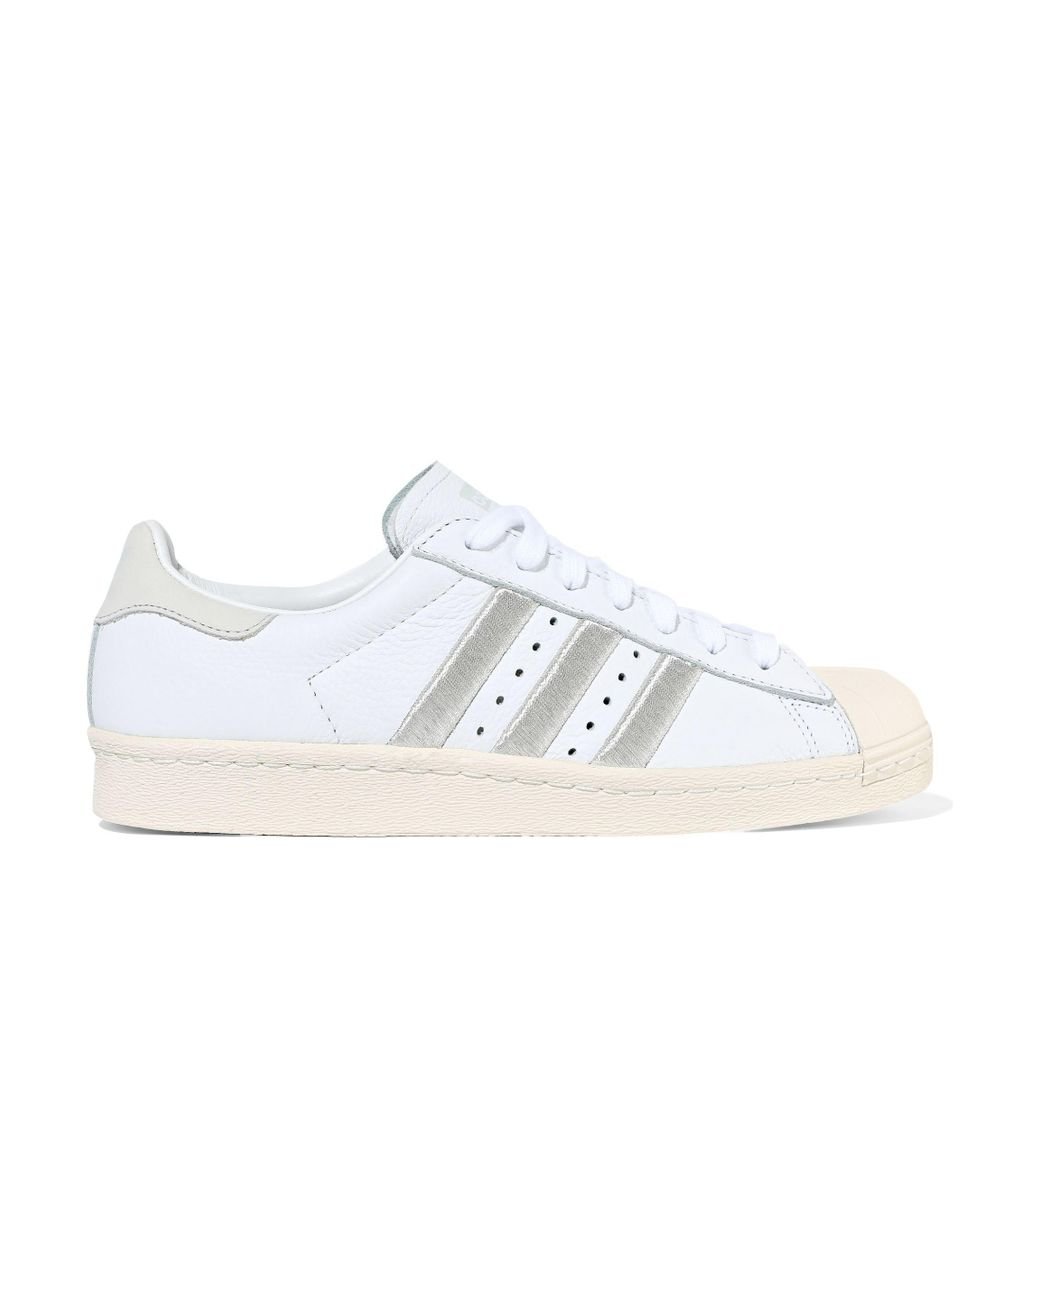 adidas superstar 80s leather trainers